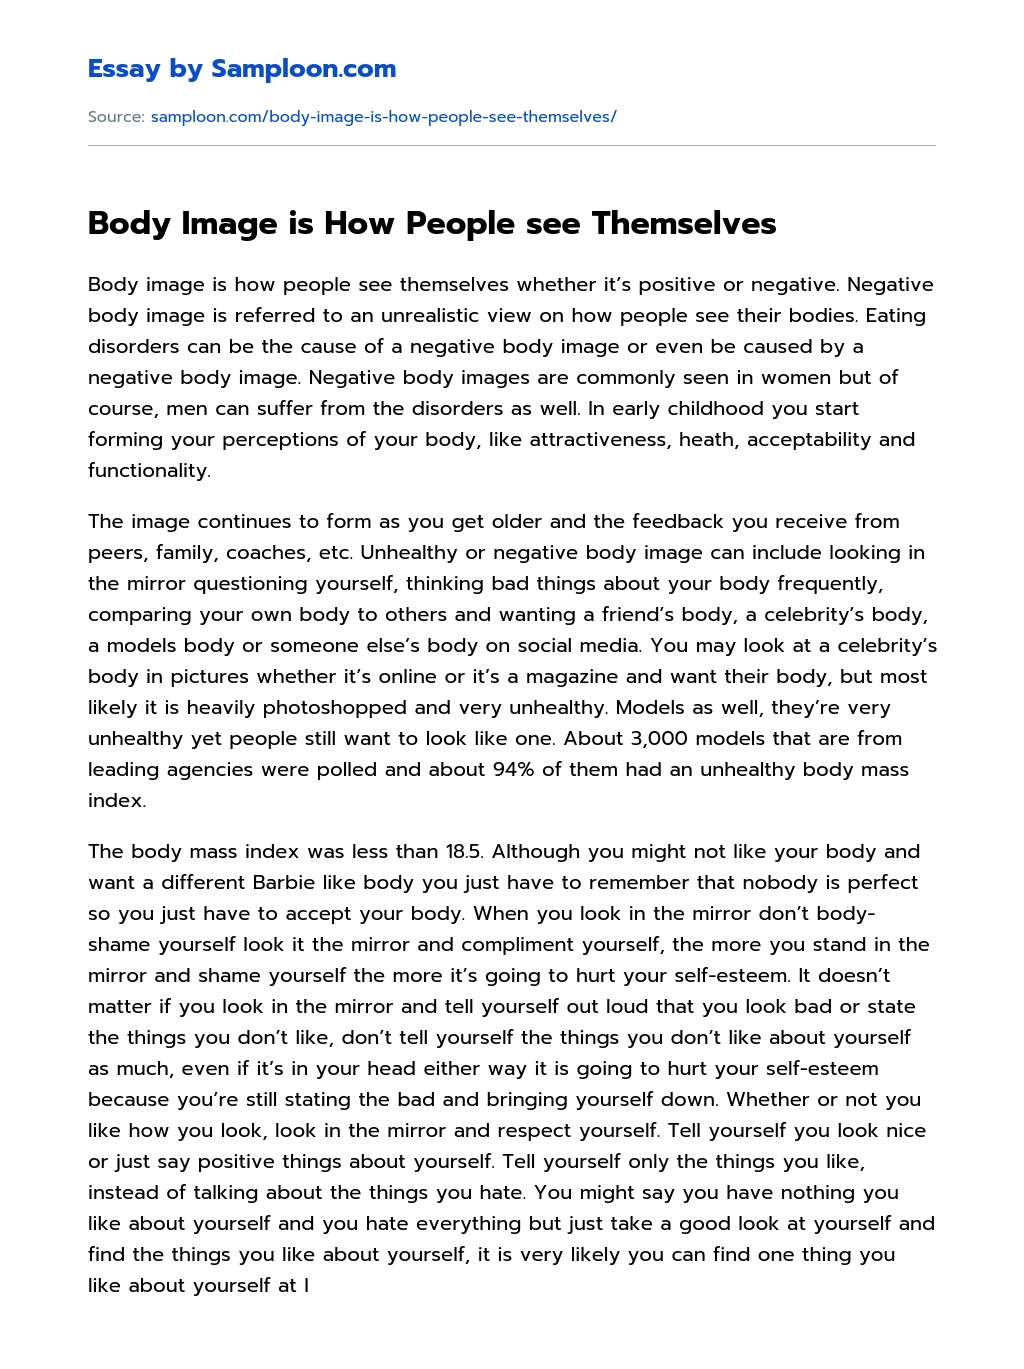 Body Image is How People see Themselves essay